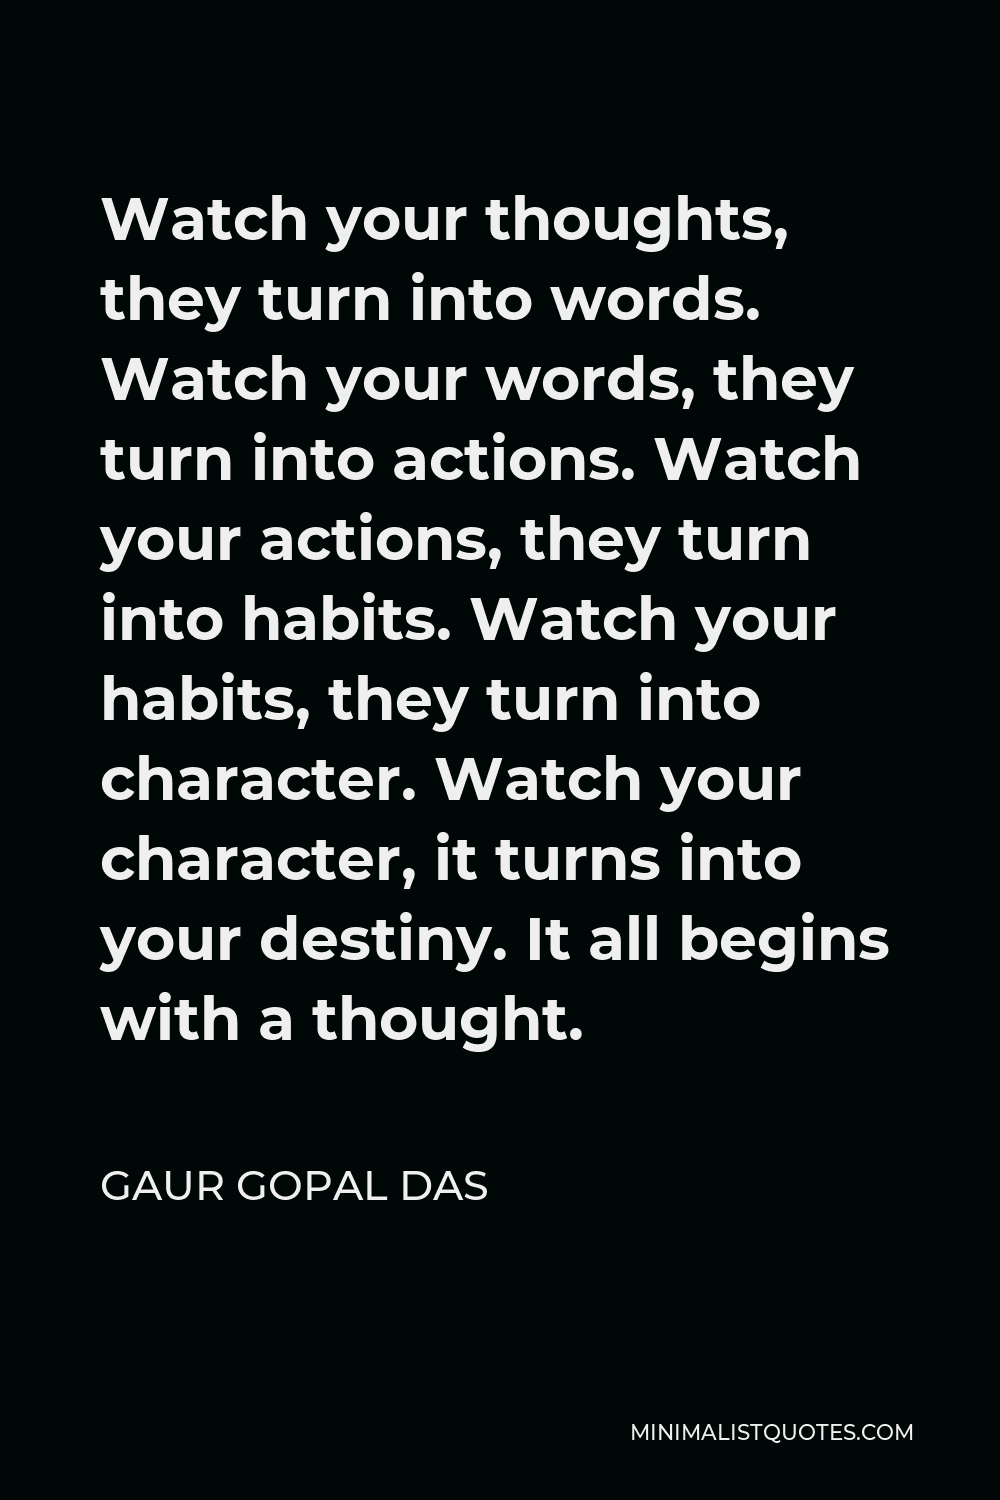 Gaur Gopal Das Quote - Watch your thoughts, they turn into words. Watch your words, they turn into actions. Watch your actions, they turn into habits. Watch your habits, they turn into character. Watch your character, it turns into your destiny. It all begins with a thought.